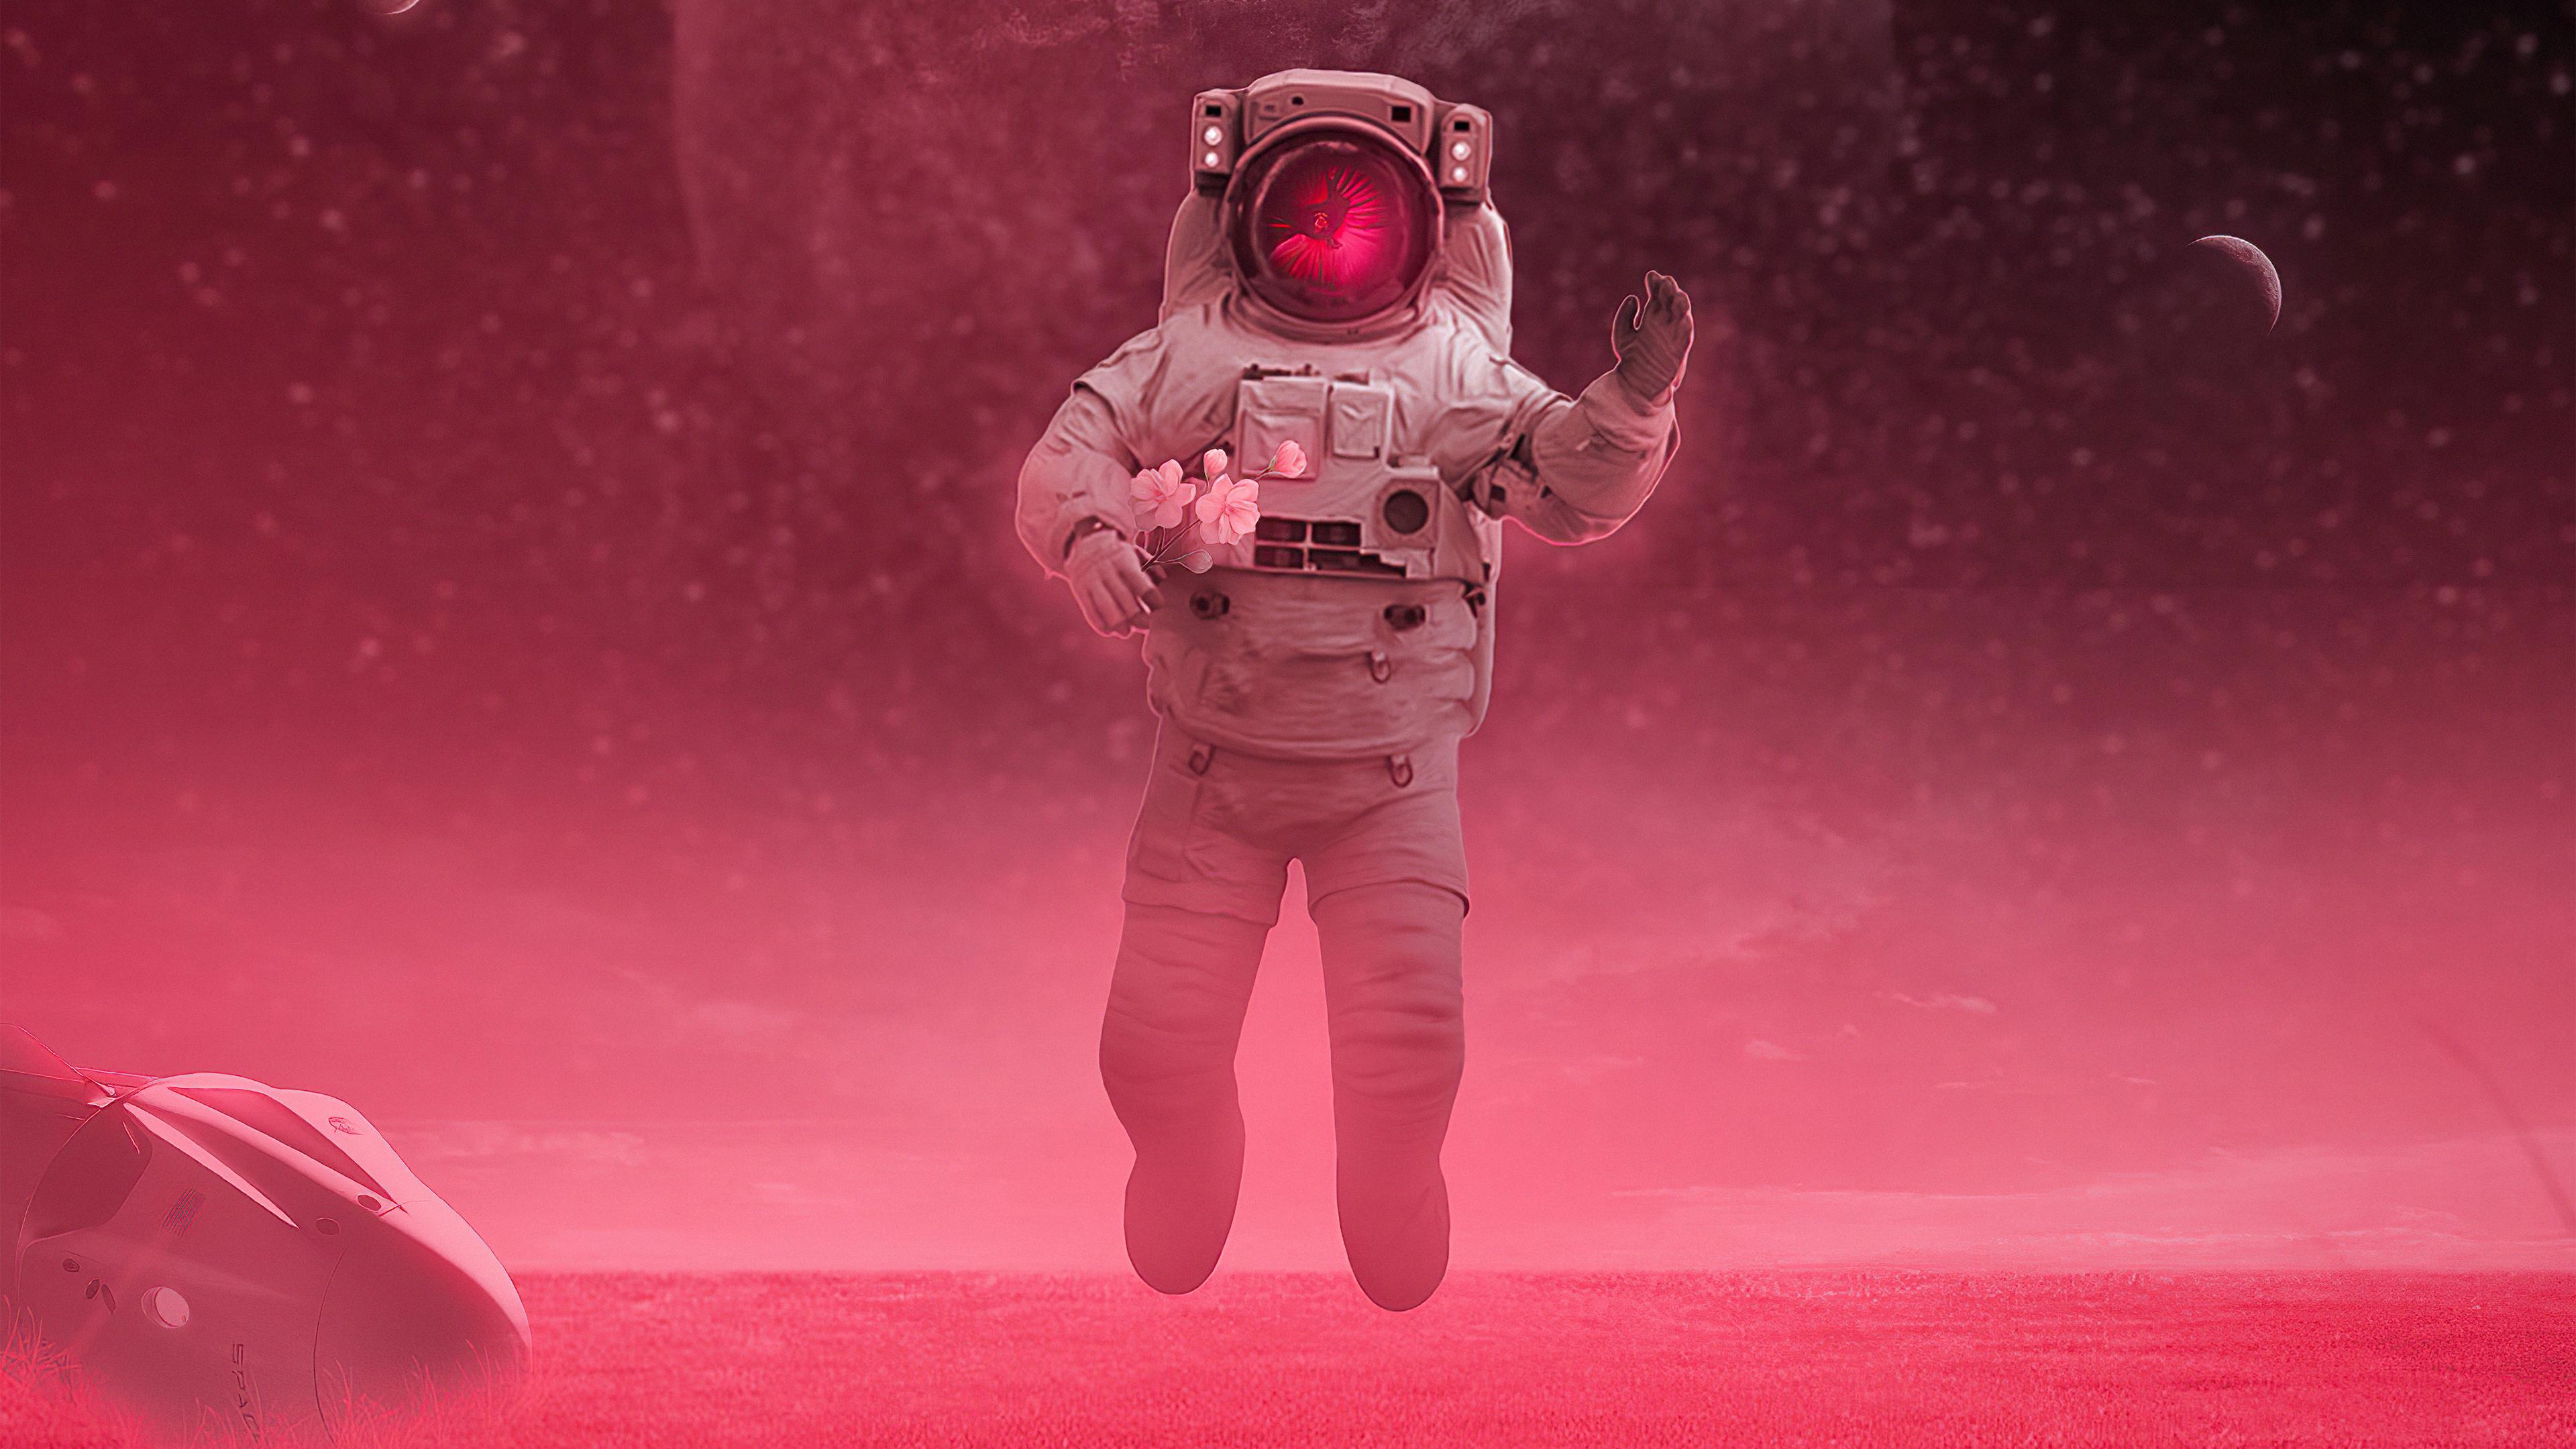 Astronaut Floating In Space Wallpapers Top Free Astronaut Floating In Space Backgrounds 5171